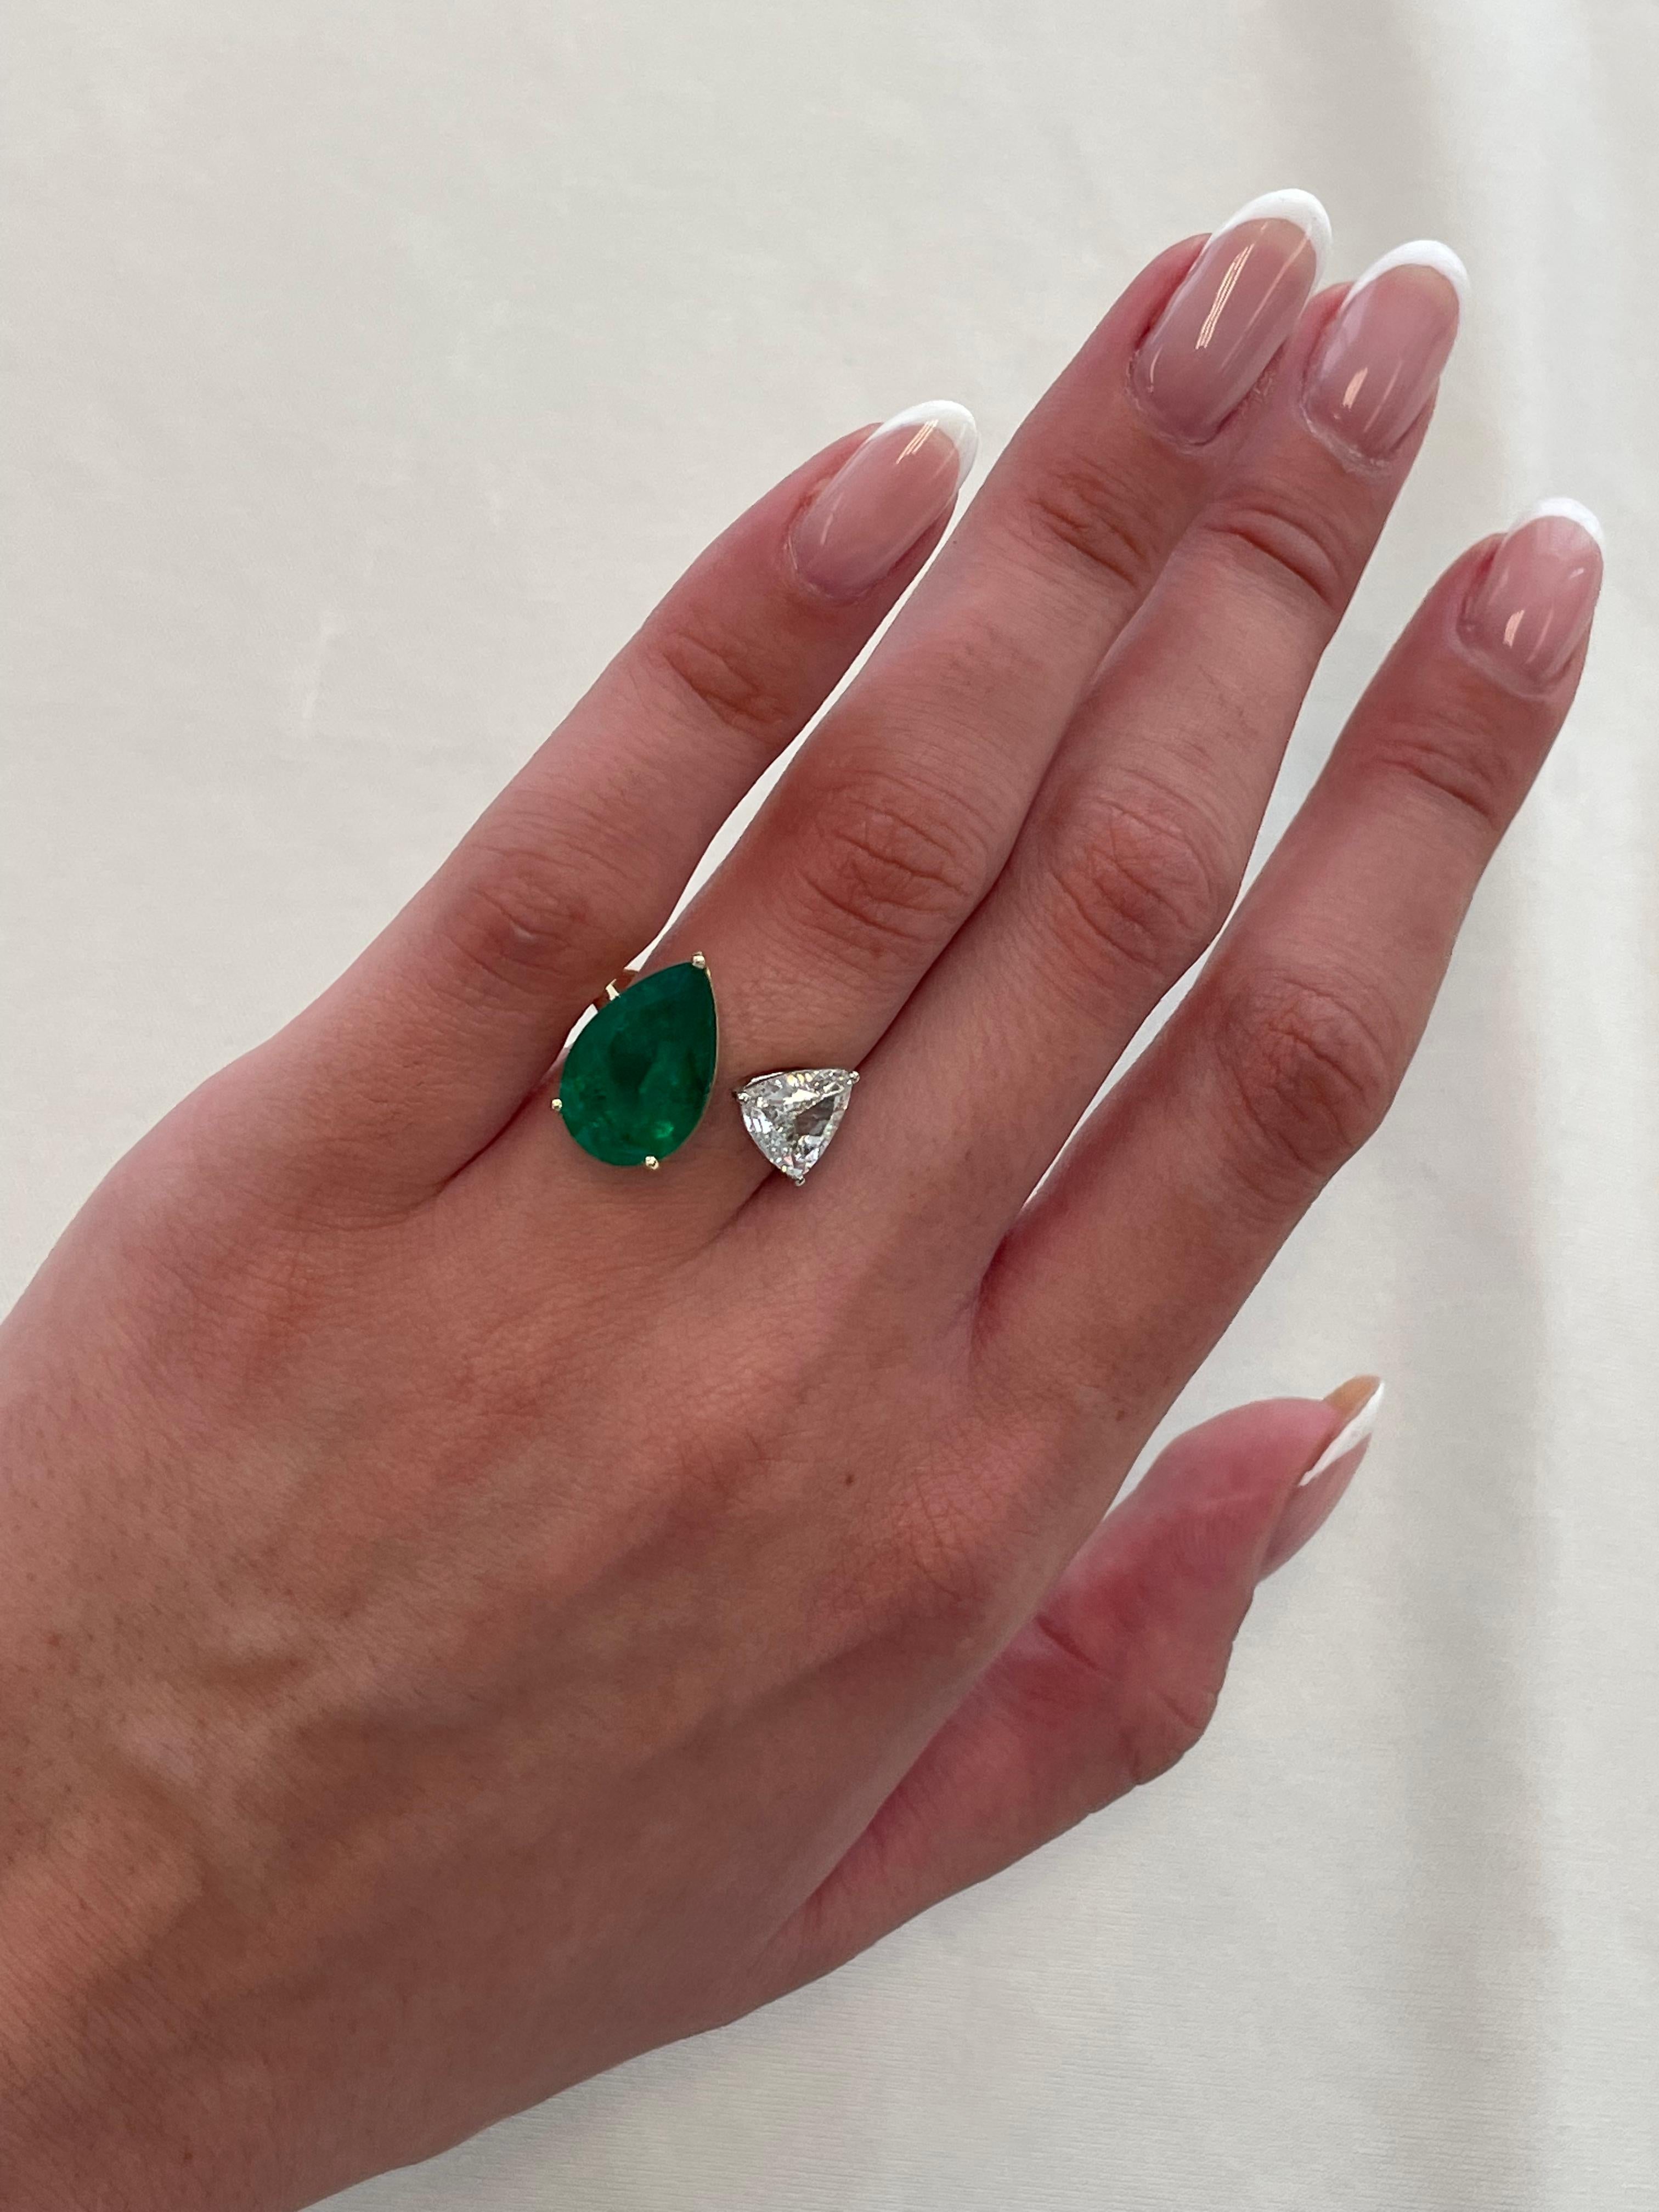 Stunning modern floating emerald and diamond open shank toi et moi ring, both stones GIA certified. By Alexander Beverly Hills.
1.21 carat princess cut diamond, GIA certified. 4.70 carat pear shape emerald, GIA certified. 18-karat yellow and white